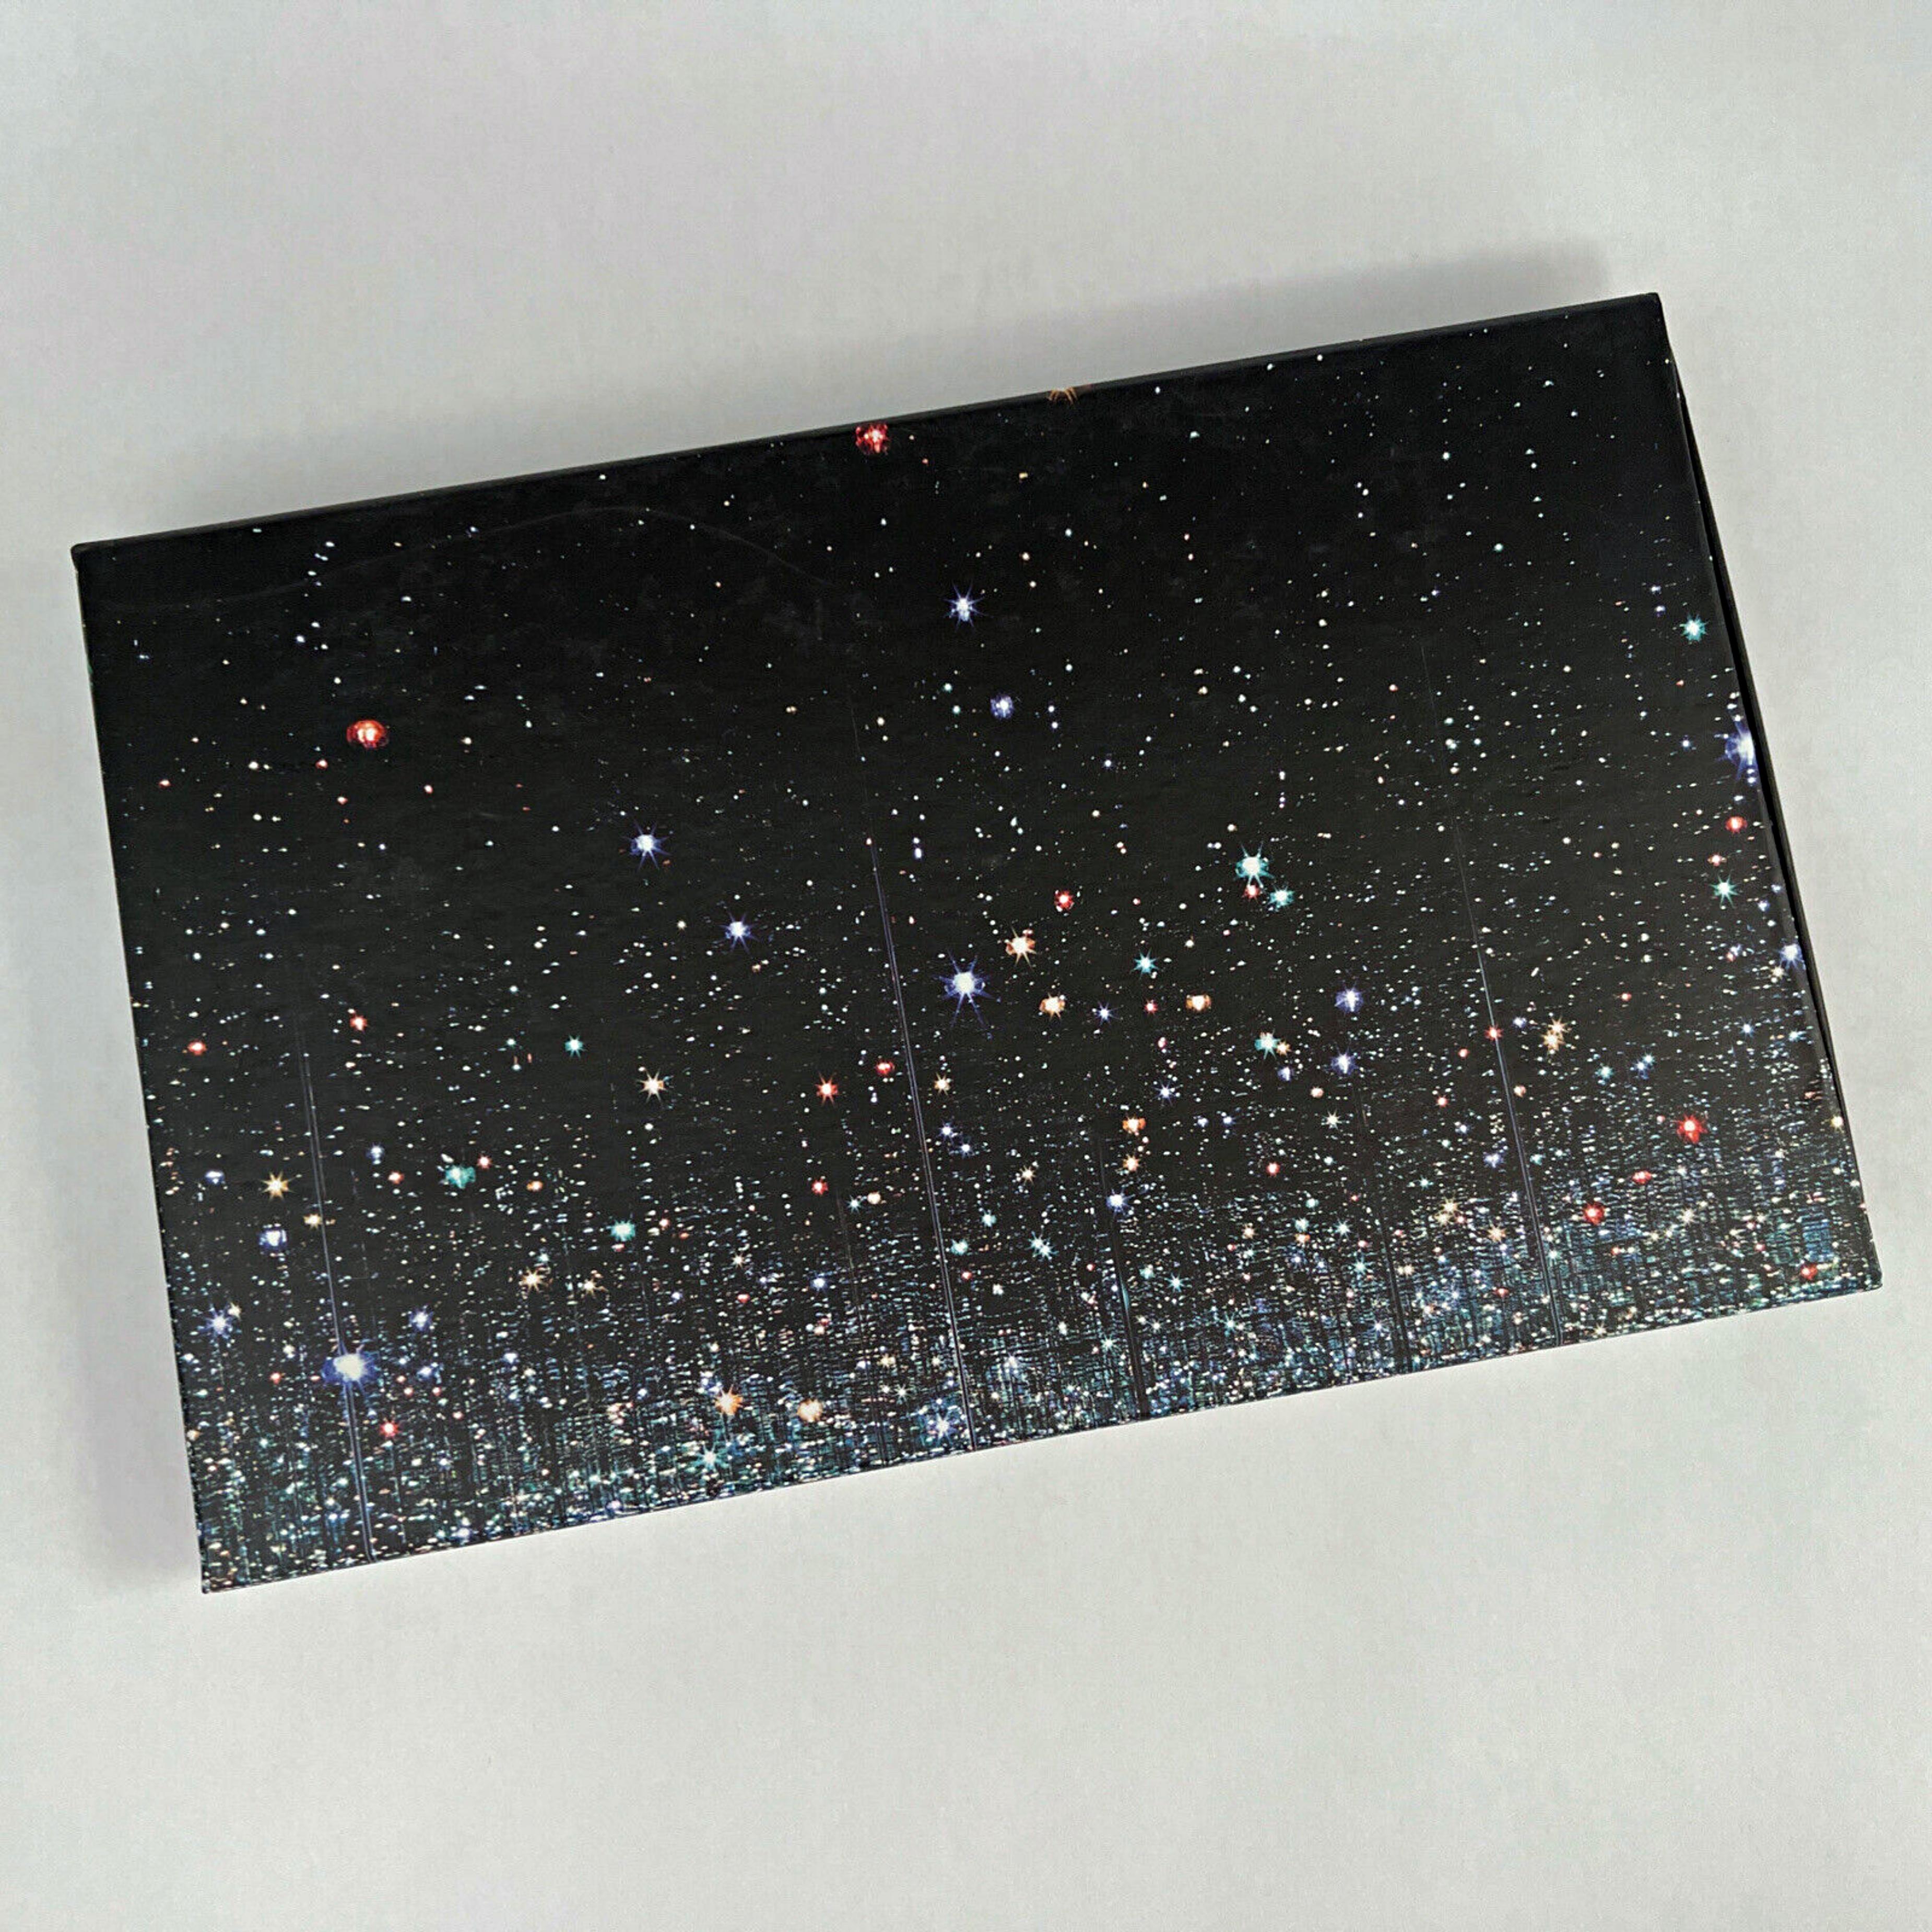 Yayoi Kusama
Infinity Mirrored Room: The Souls of Millions of Light Years Away: Leather Clutch Purse in Original Box, 2017
Leather outside; polyester inside
6 × 10 × 2 inches
This leather clutch with polyester on the inside, is, according to the